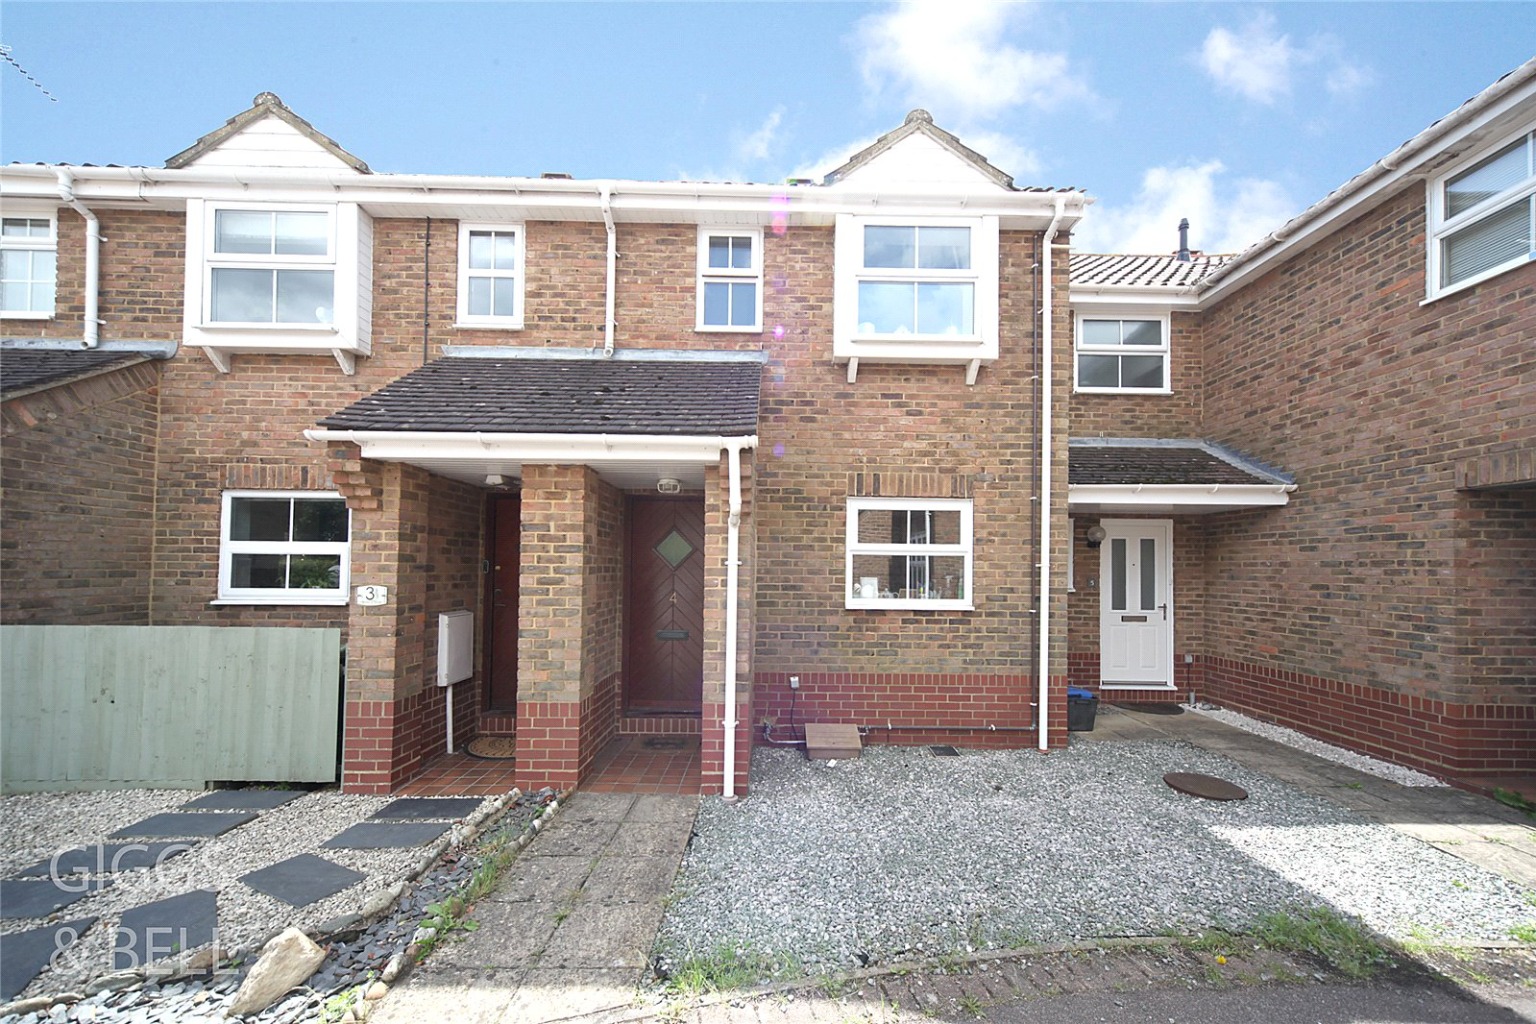 2 bed terraced house for sale in Edkins Close, Luton, LU2 